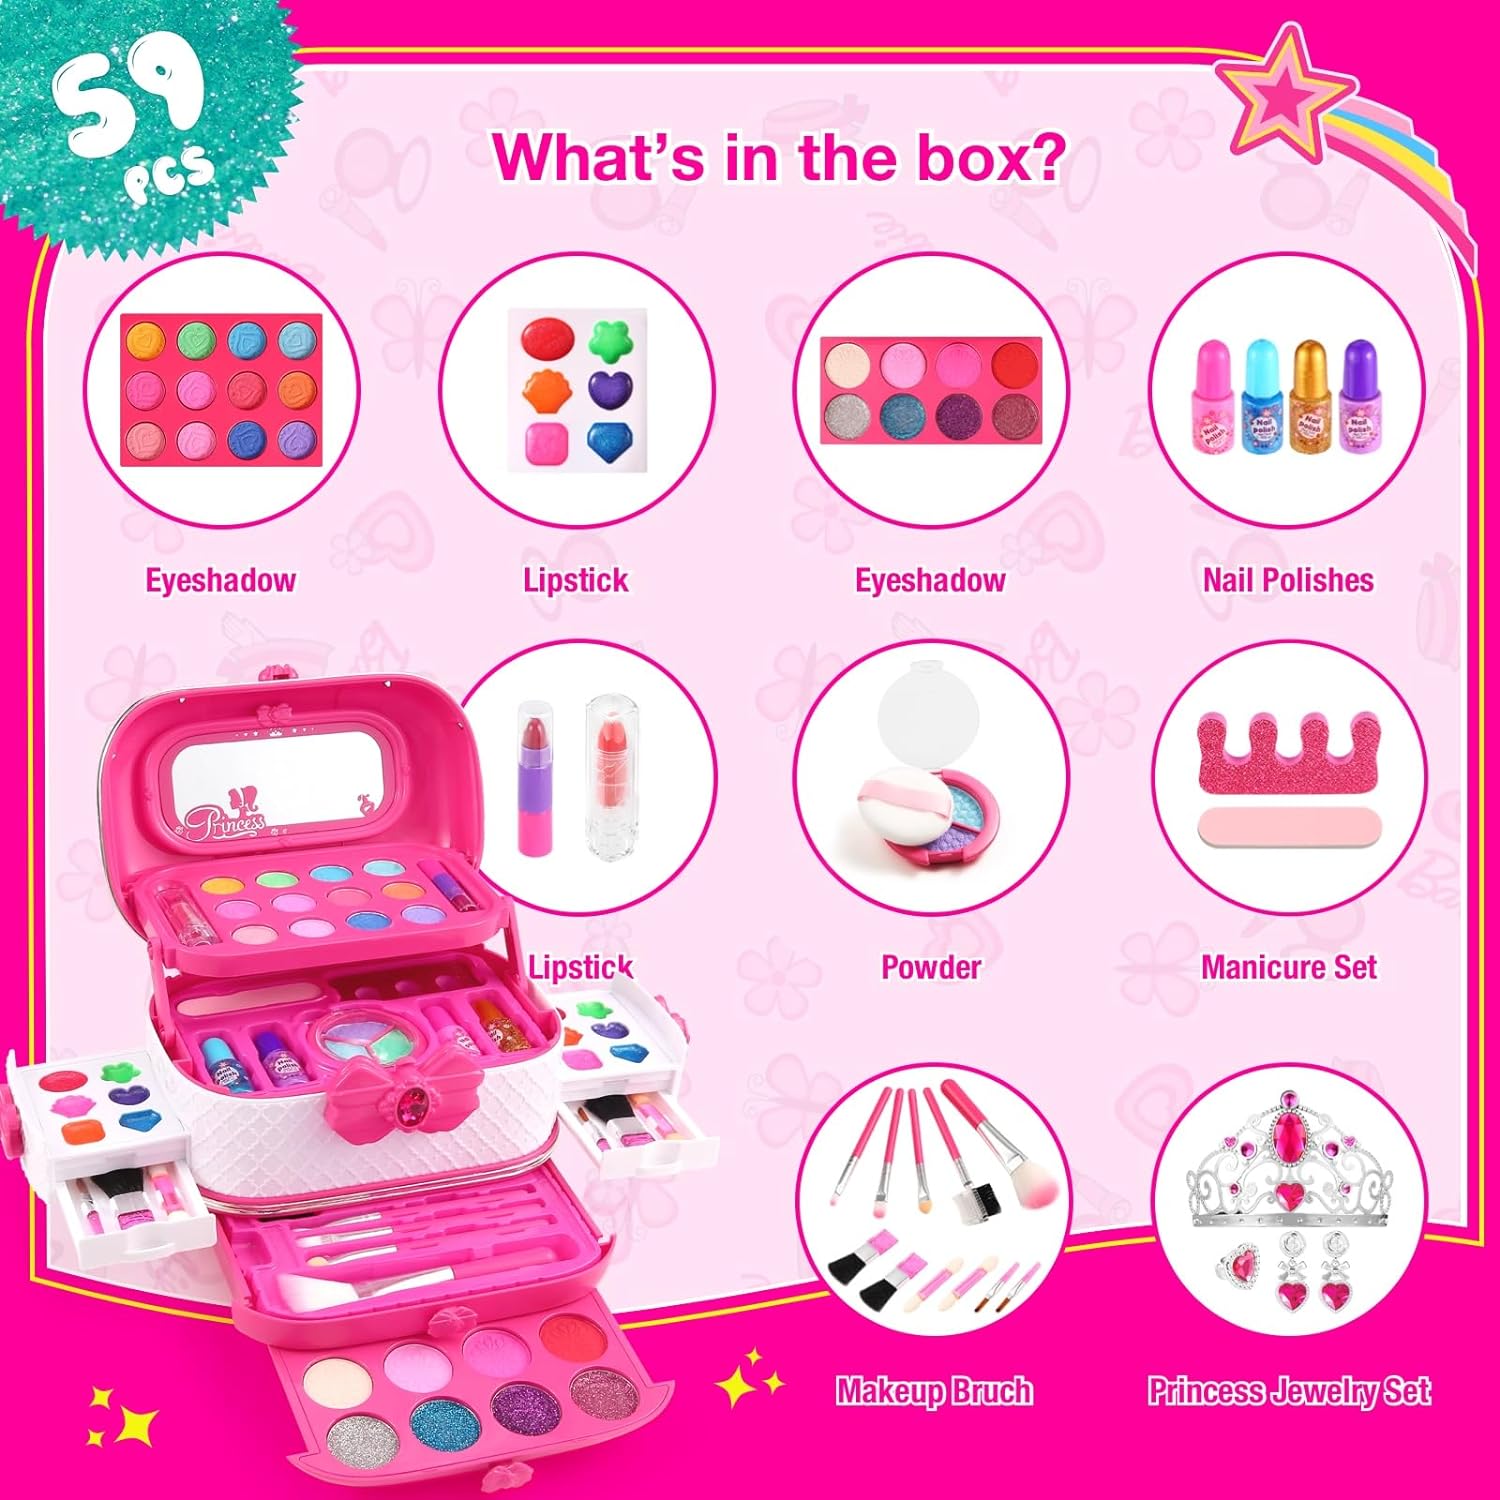 You are currently viewing Esnowlee Kids Makeup Kit Review